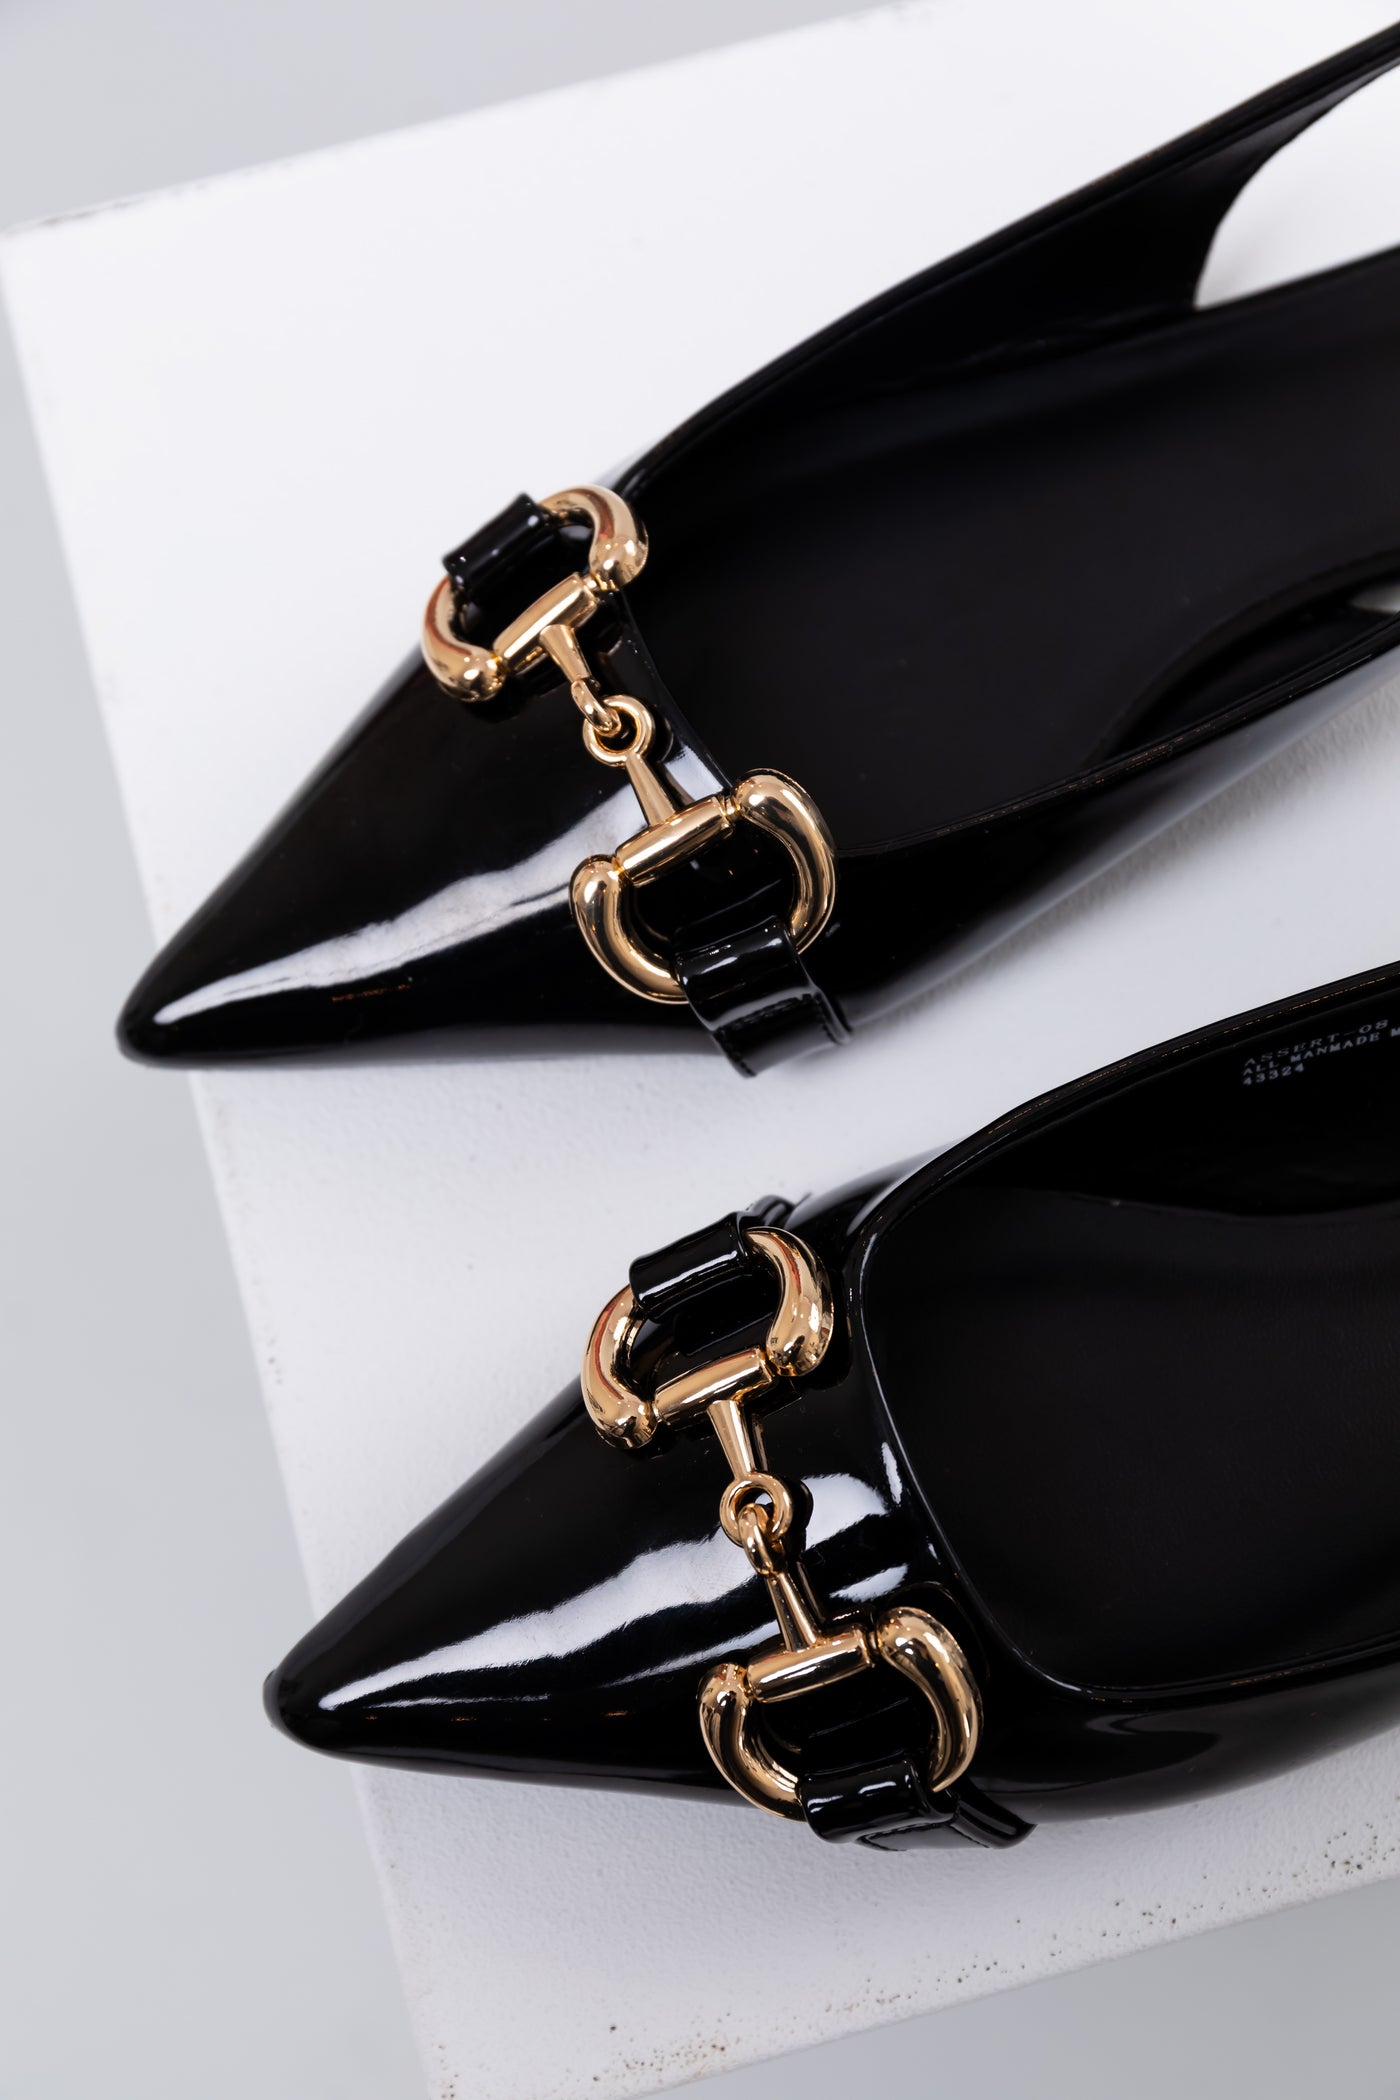 Black Pleather Pointed Toe Sling Back Flats